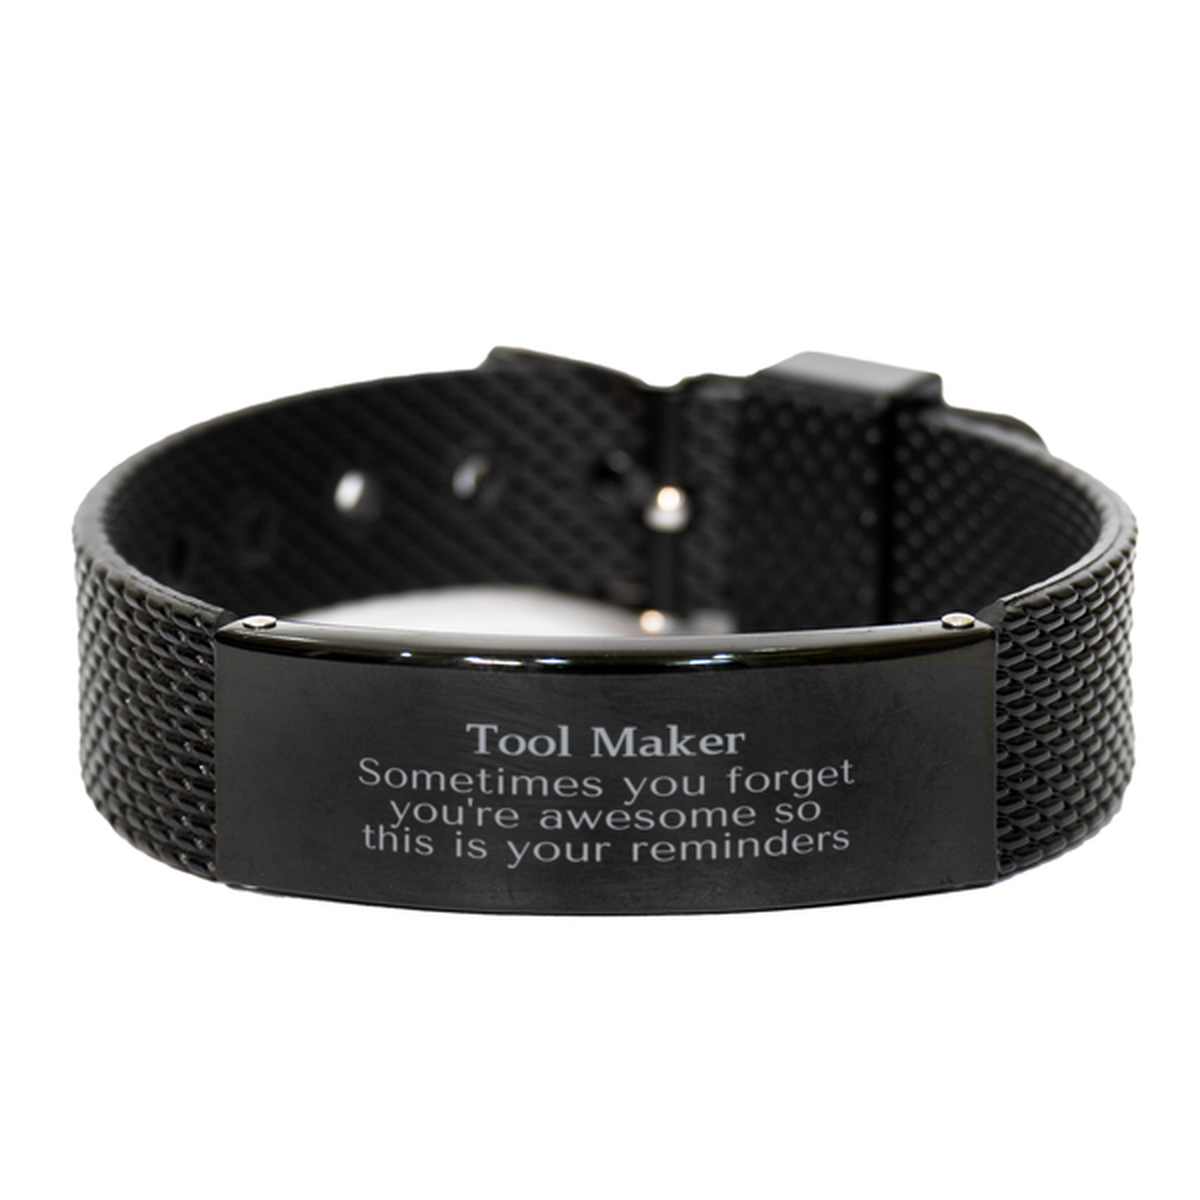 Sentimental Tool Maker Black Shark Mesh Bracelet, Tool Maker Sometimes you forget you're awesome so this is your reminders, Graduation Christmas Birthday Gifts for Tool Maker, Men, Women, Coworkers